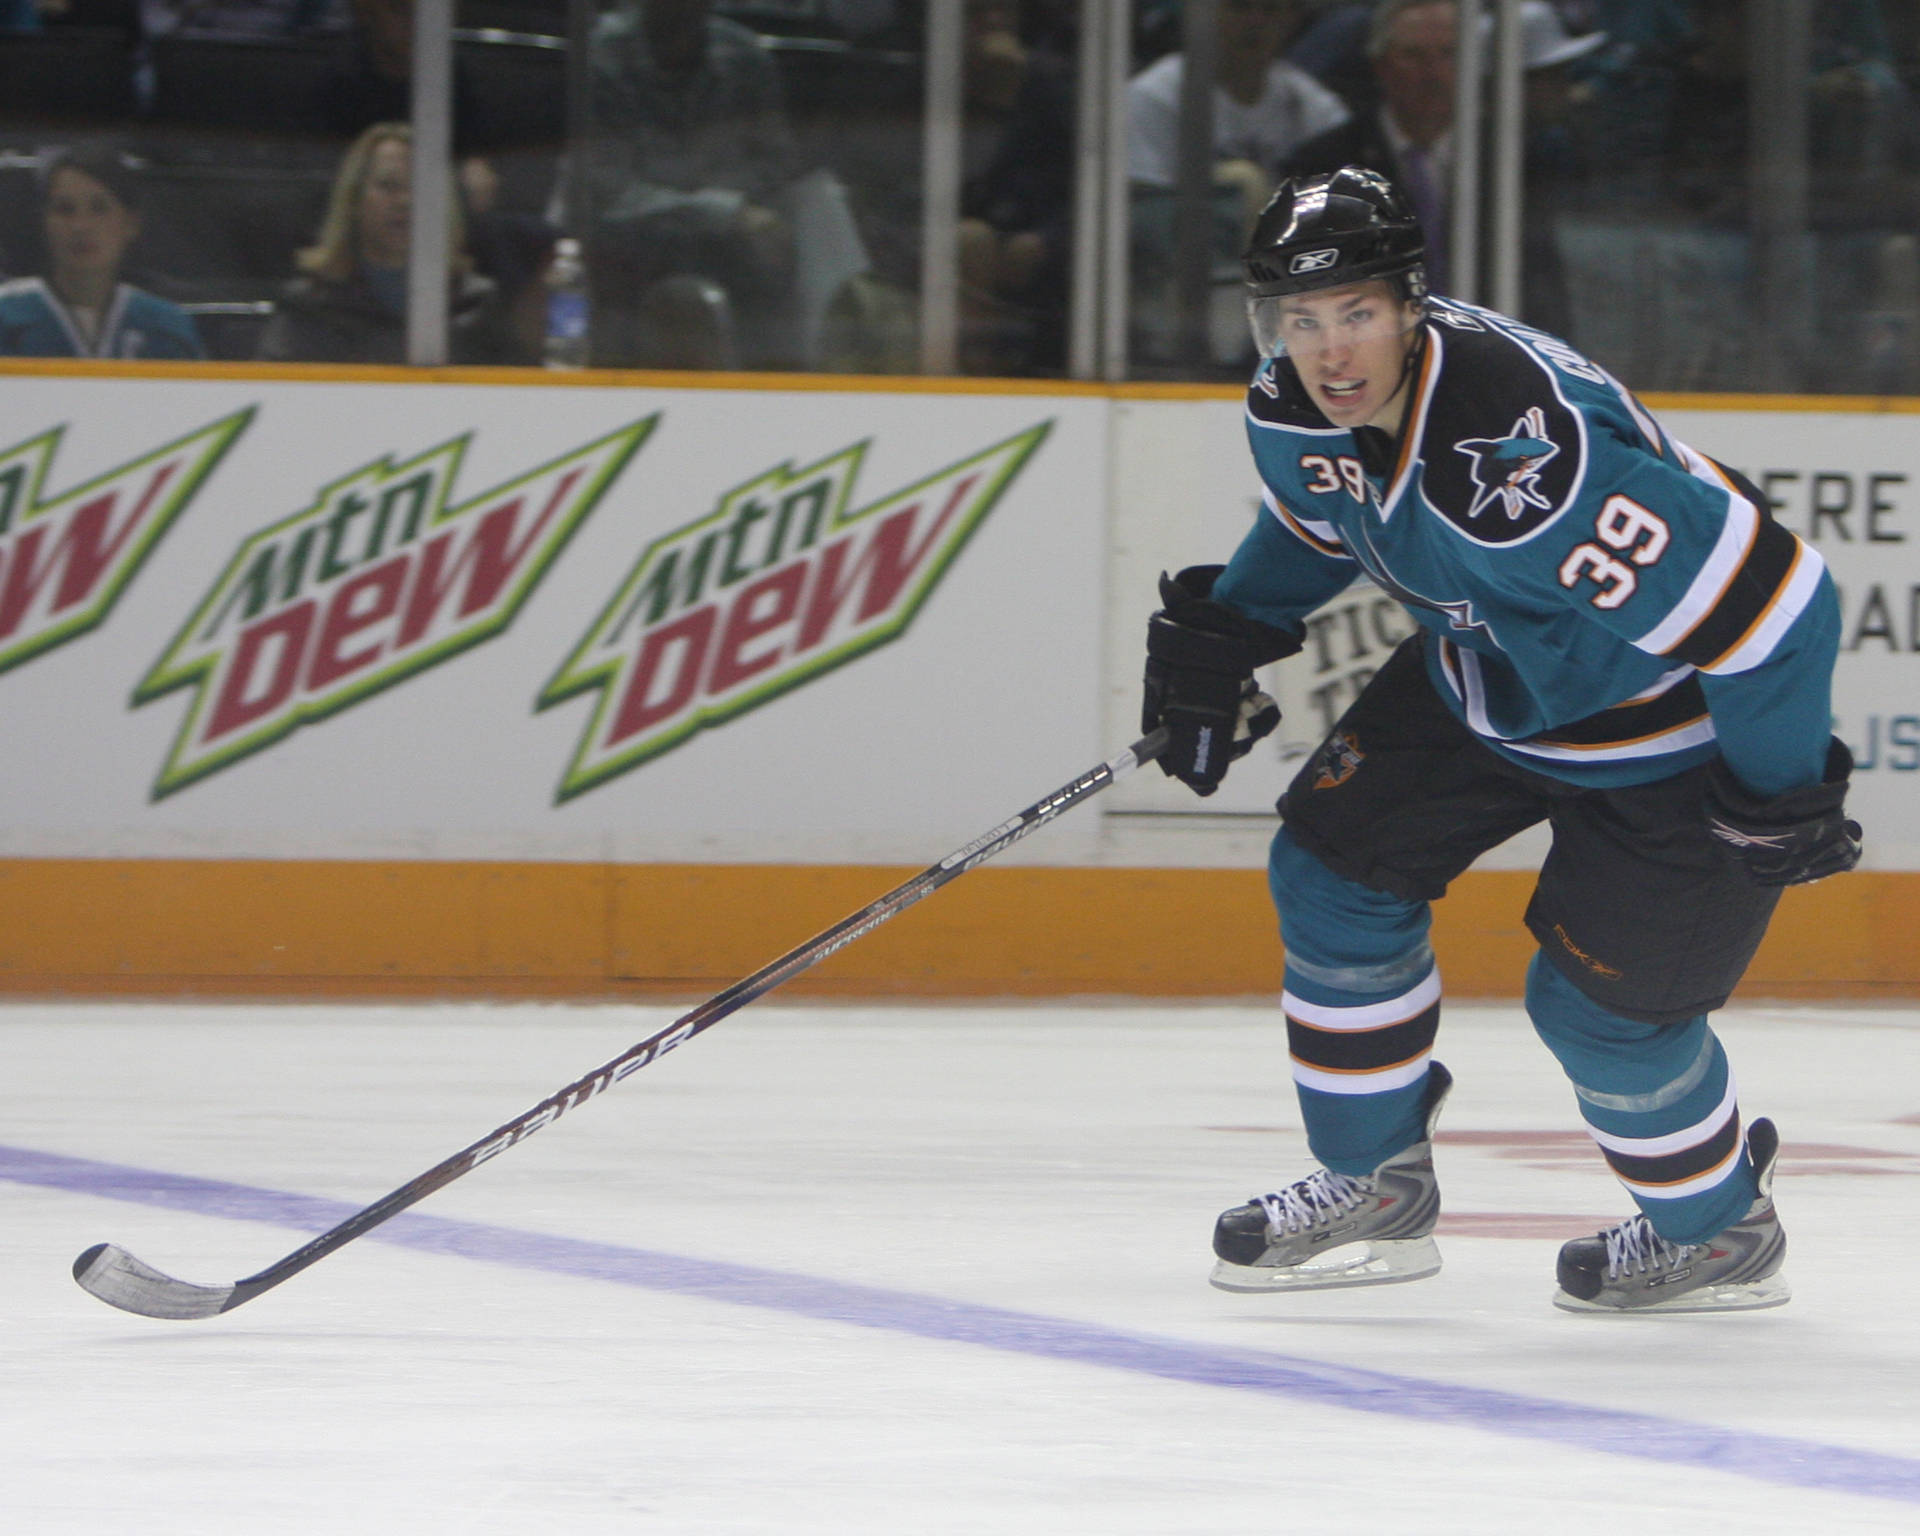 Canadian Professional Ice Hockey Center Logan Couture On Rink